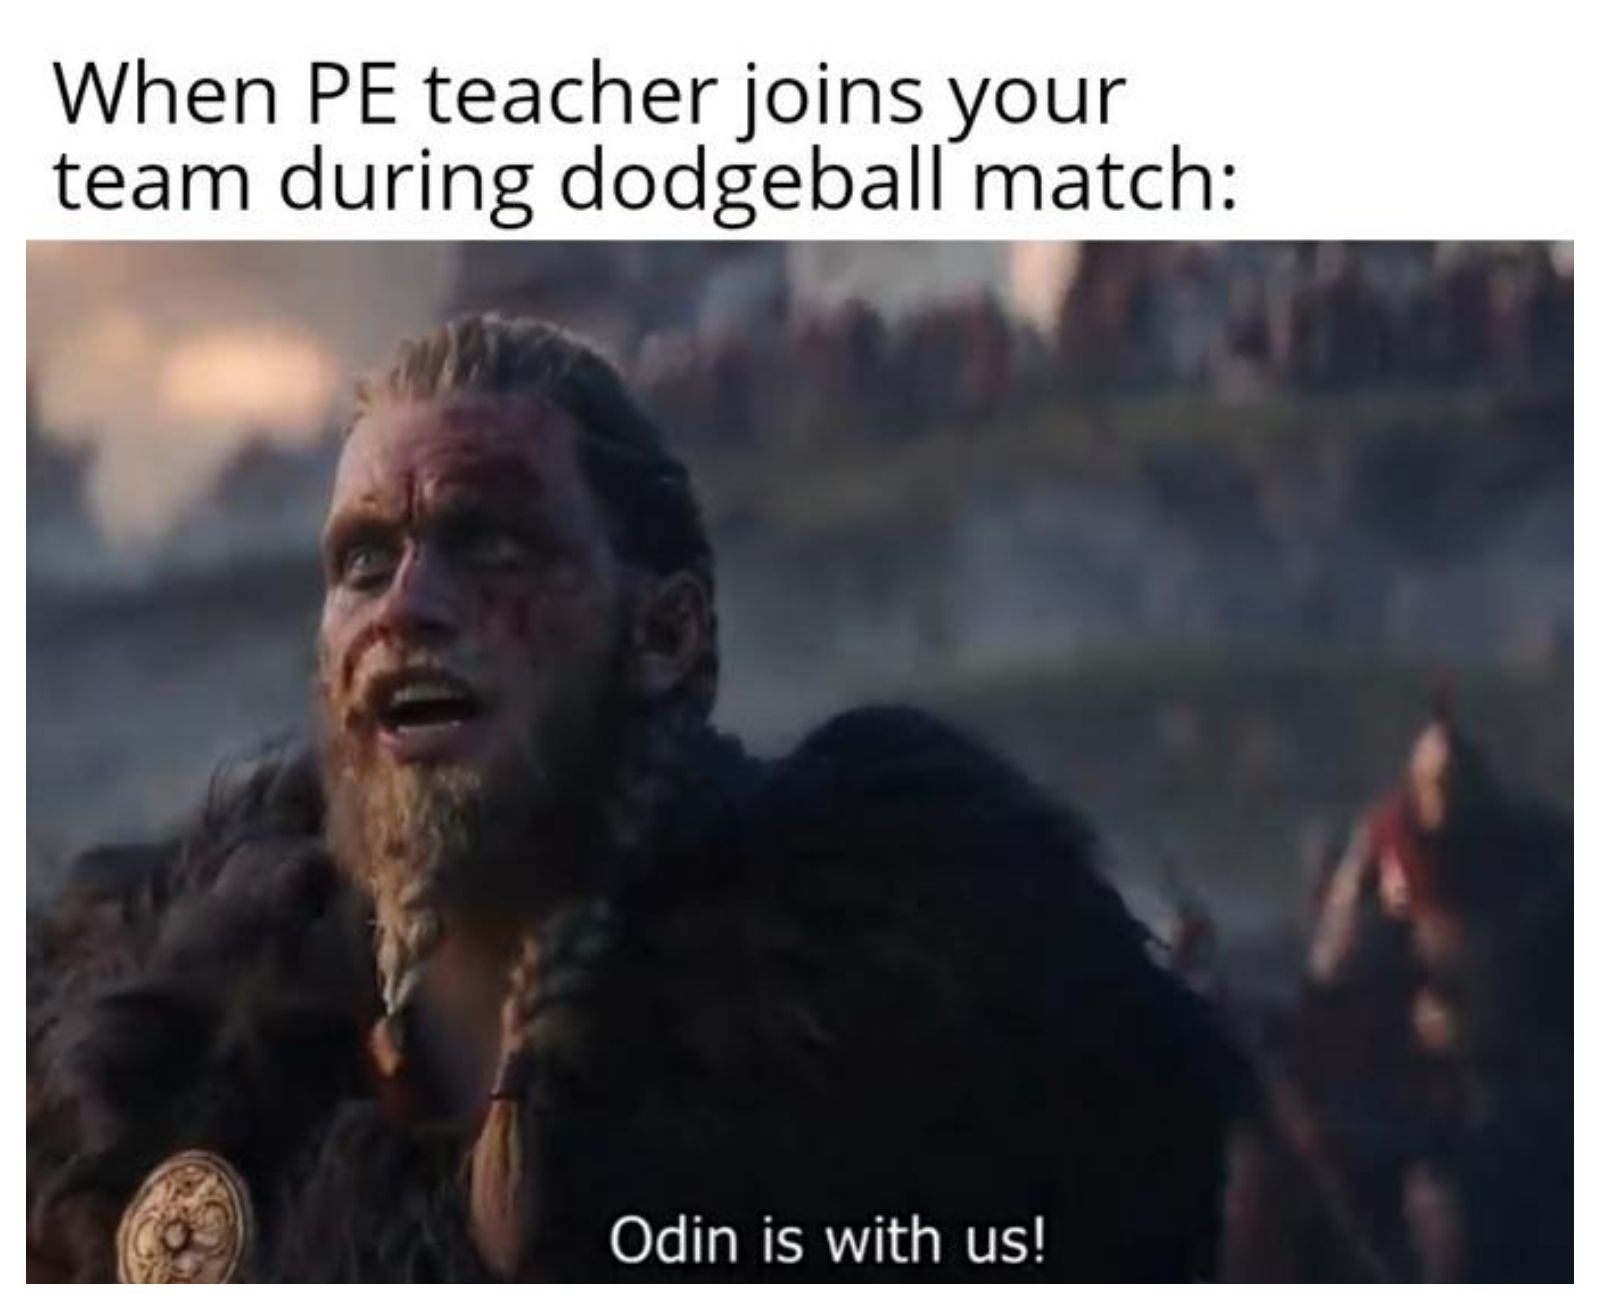 The odin is with us meme, one of the first to emerge after the trailer for the game came out.